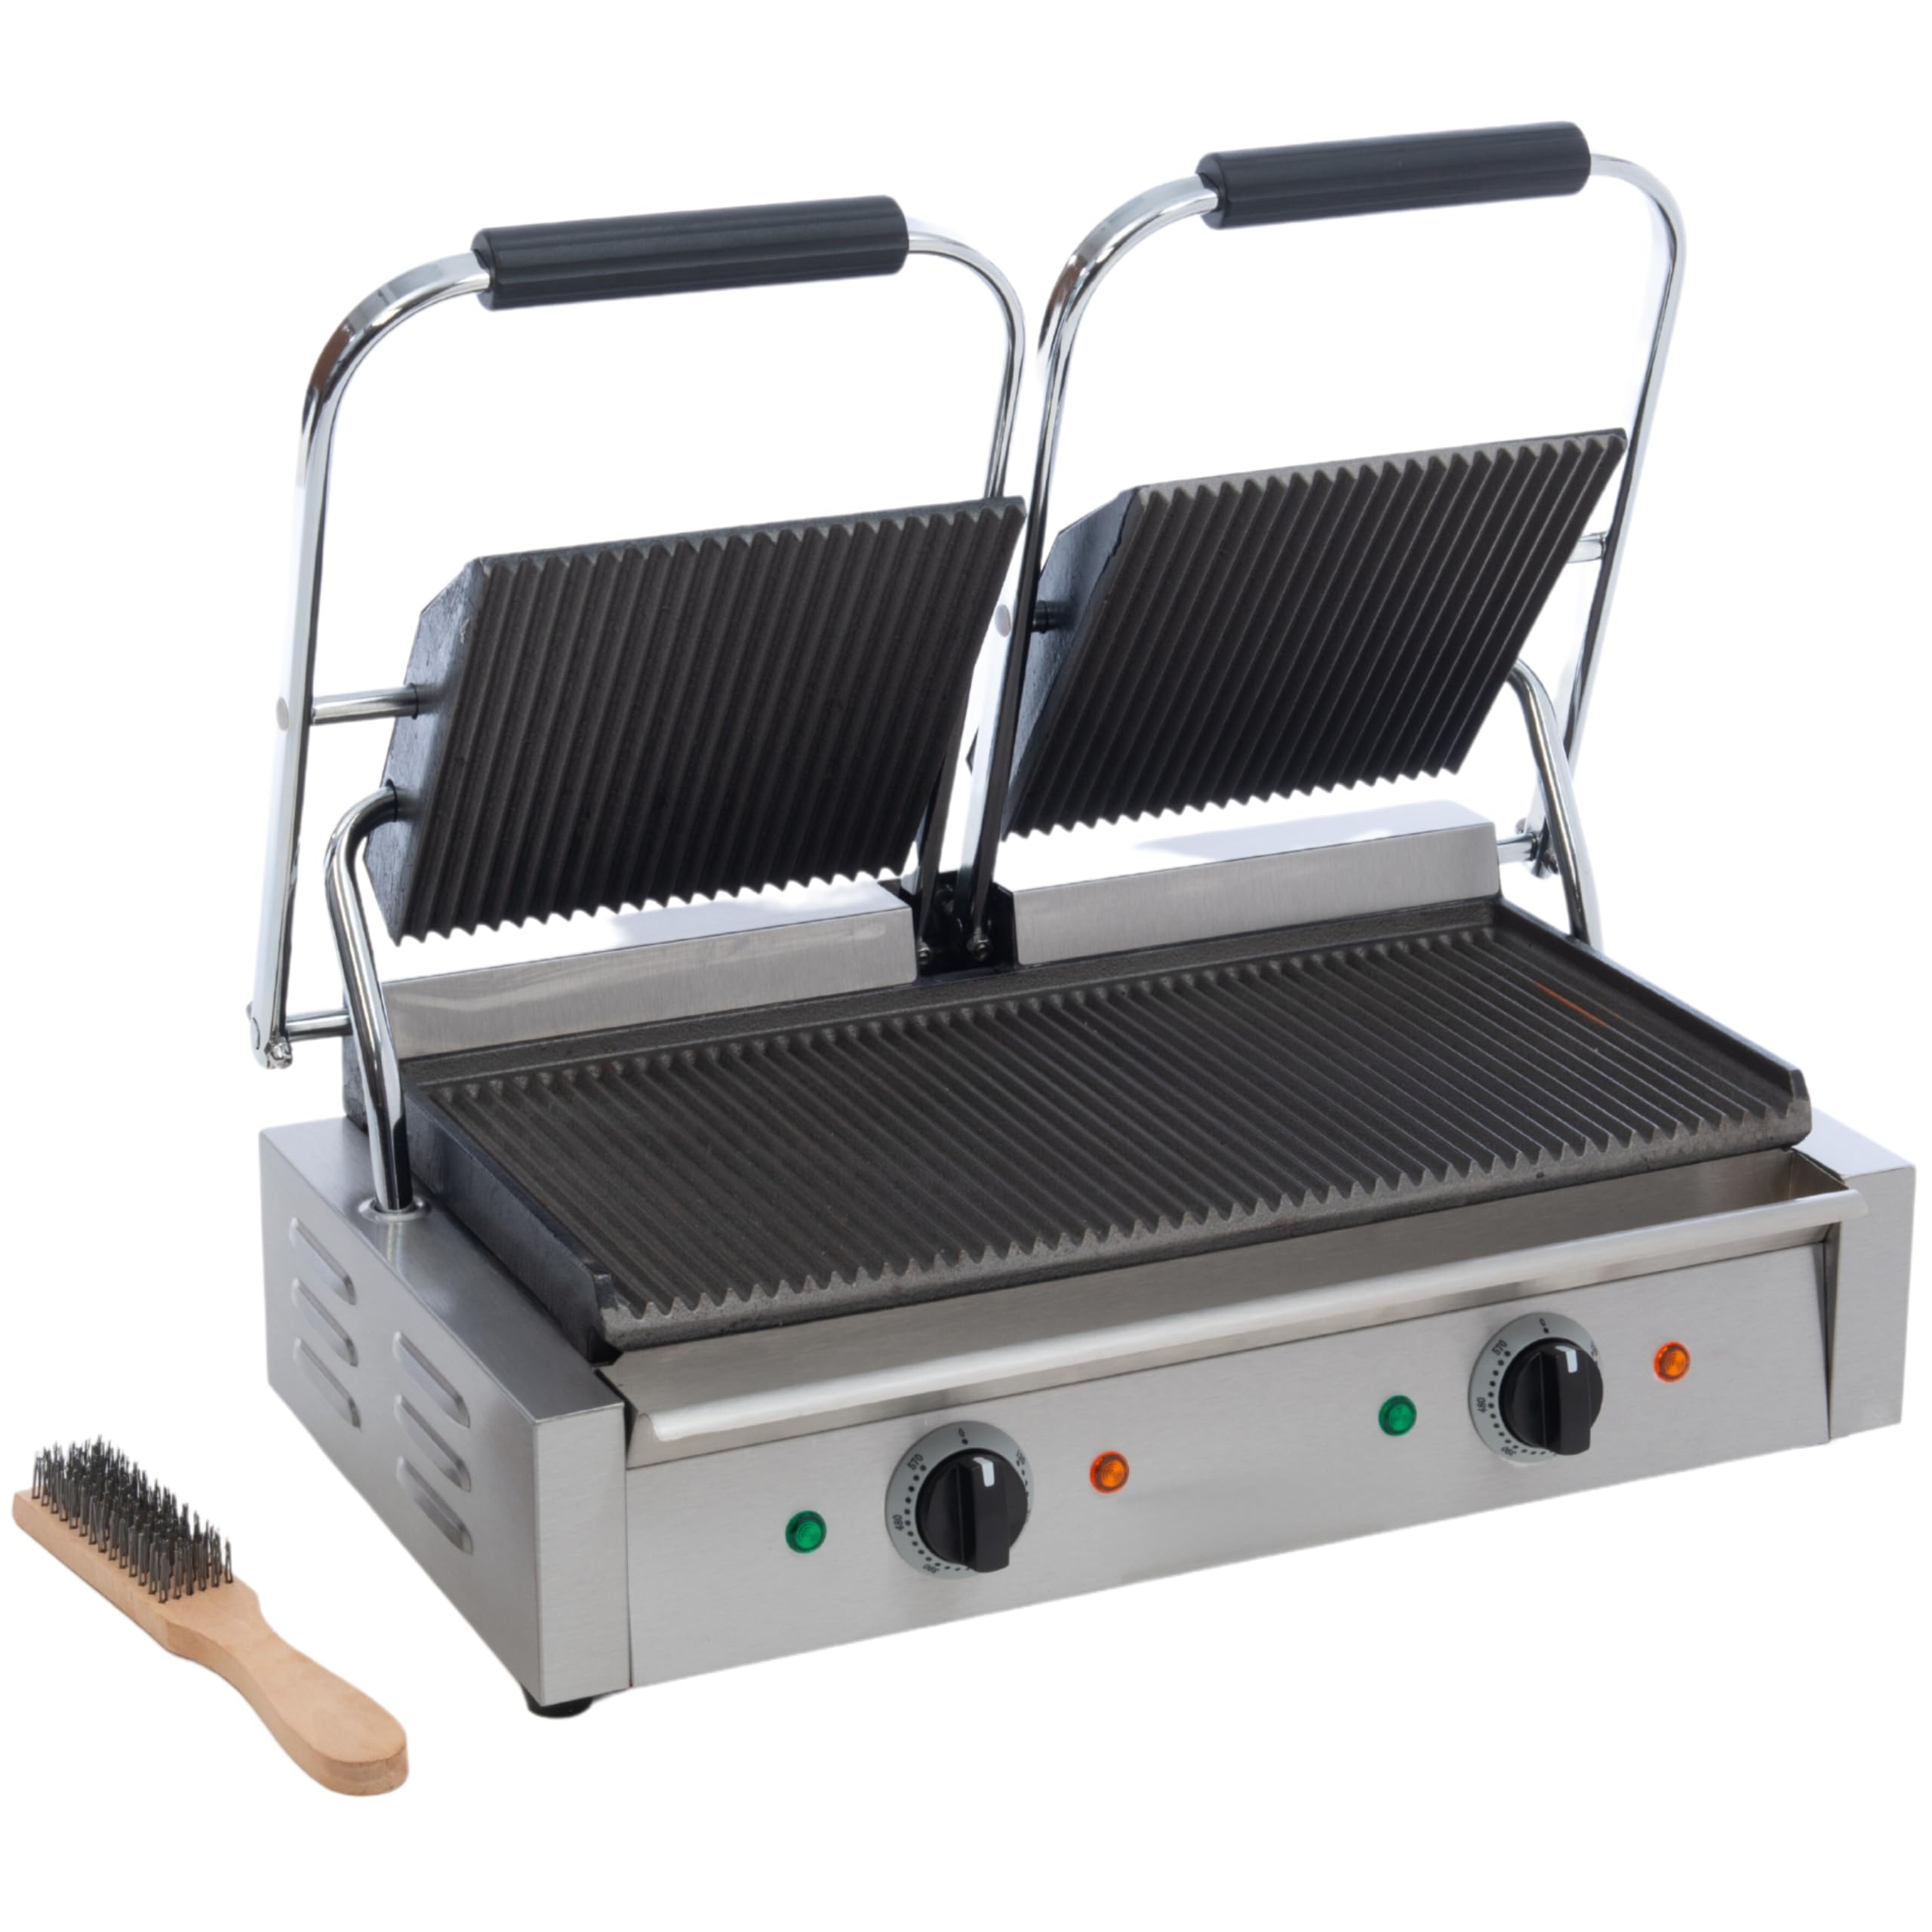 FSE SG-813 Double Electric Sandwich Panini Grill with Cast Iron Grooved Plates, Stainless Steel, Oil Tray, 120v